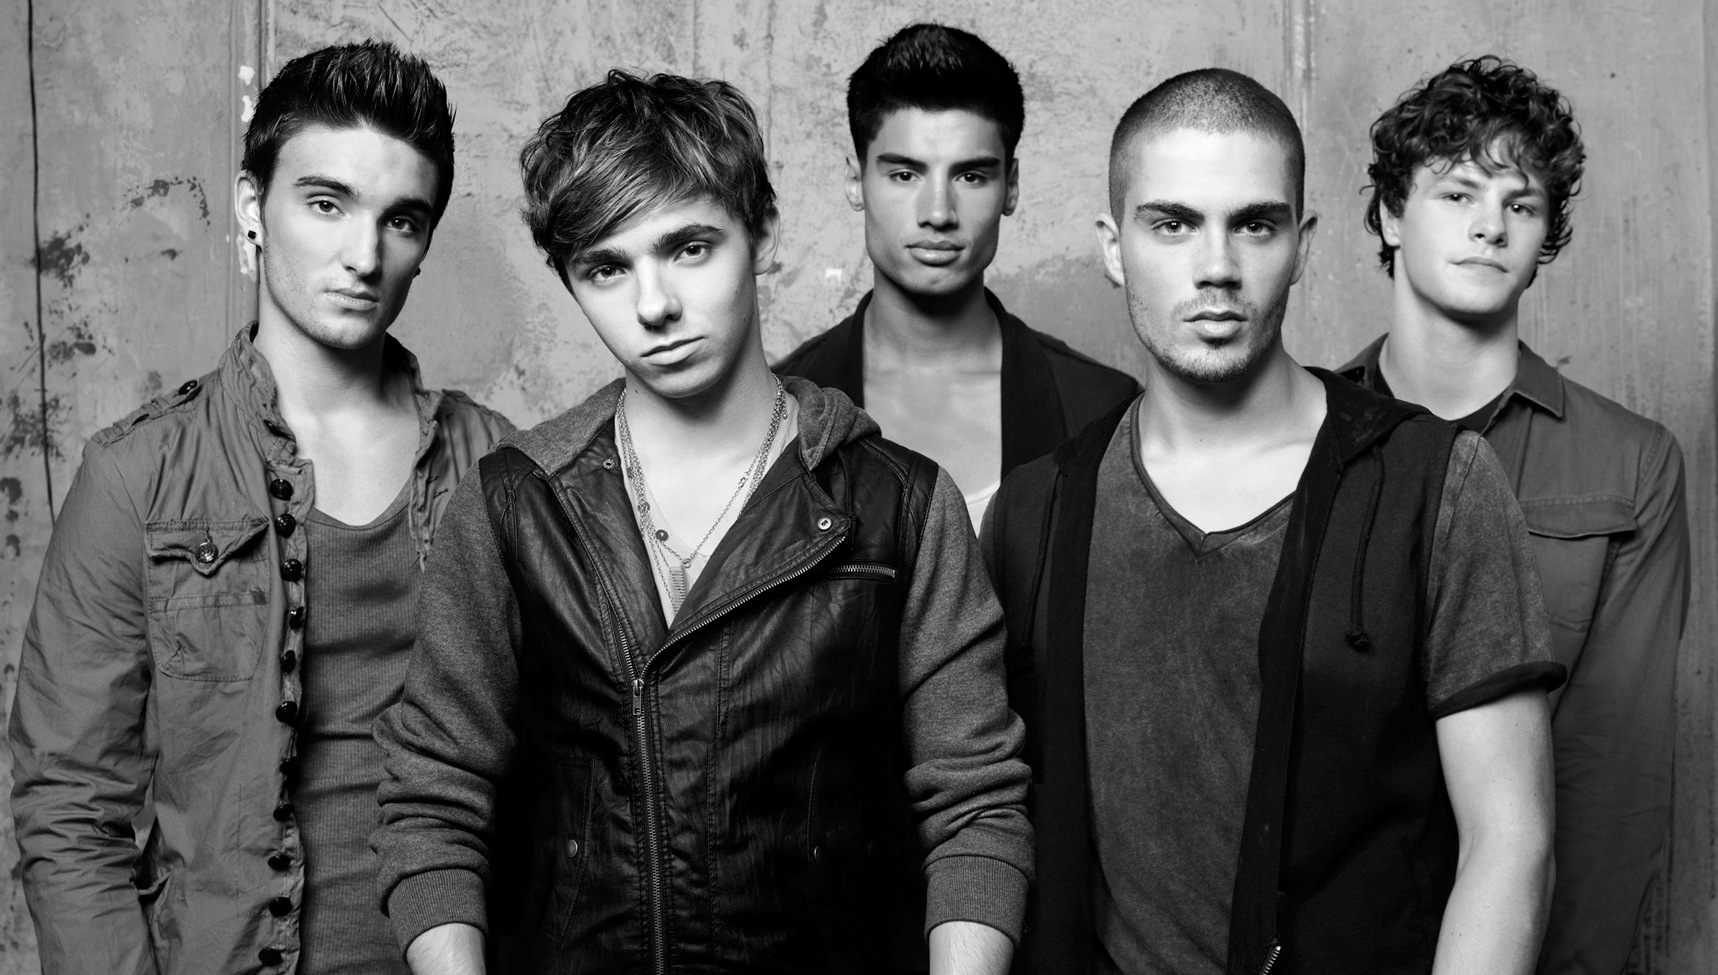 the-wanted